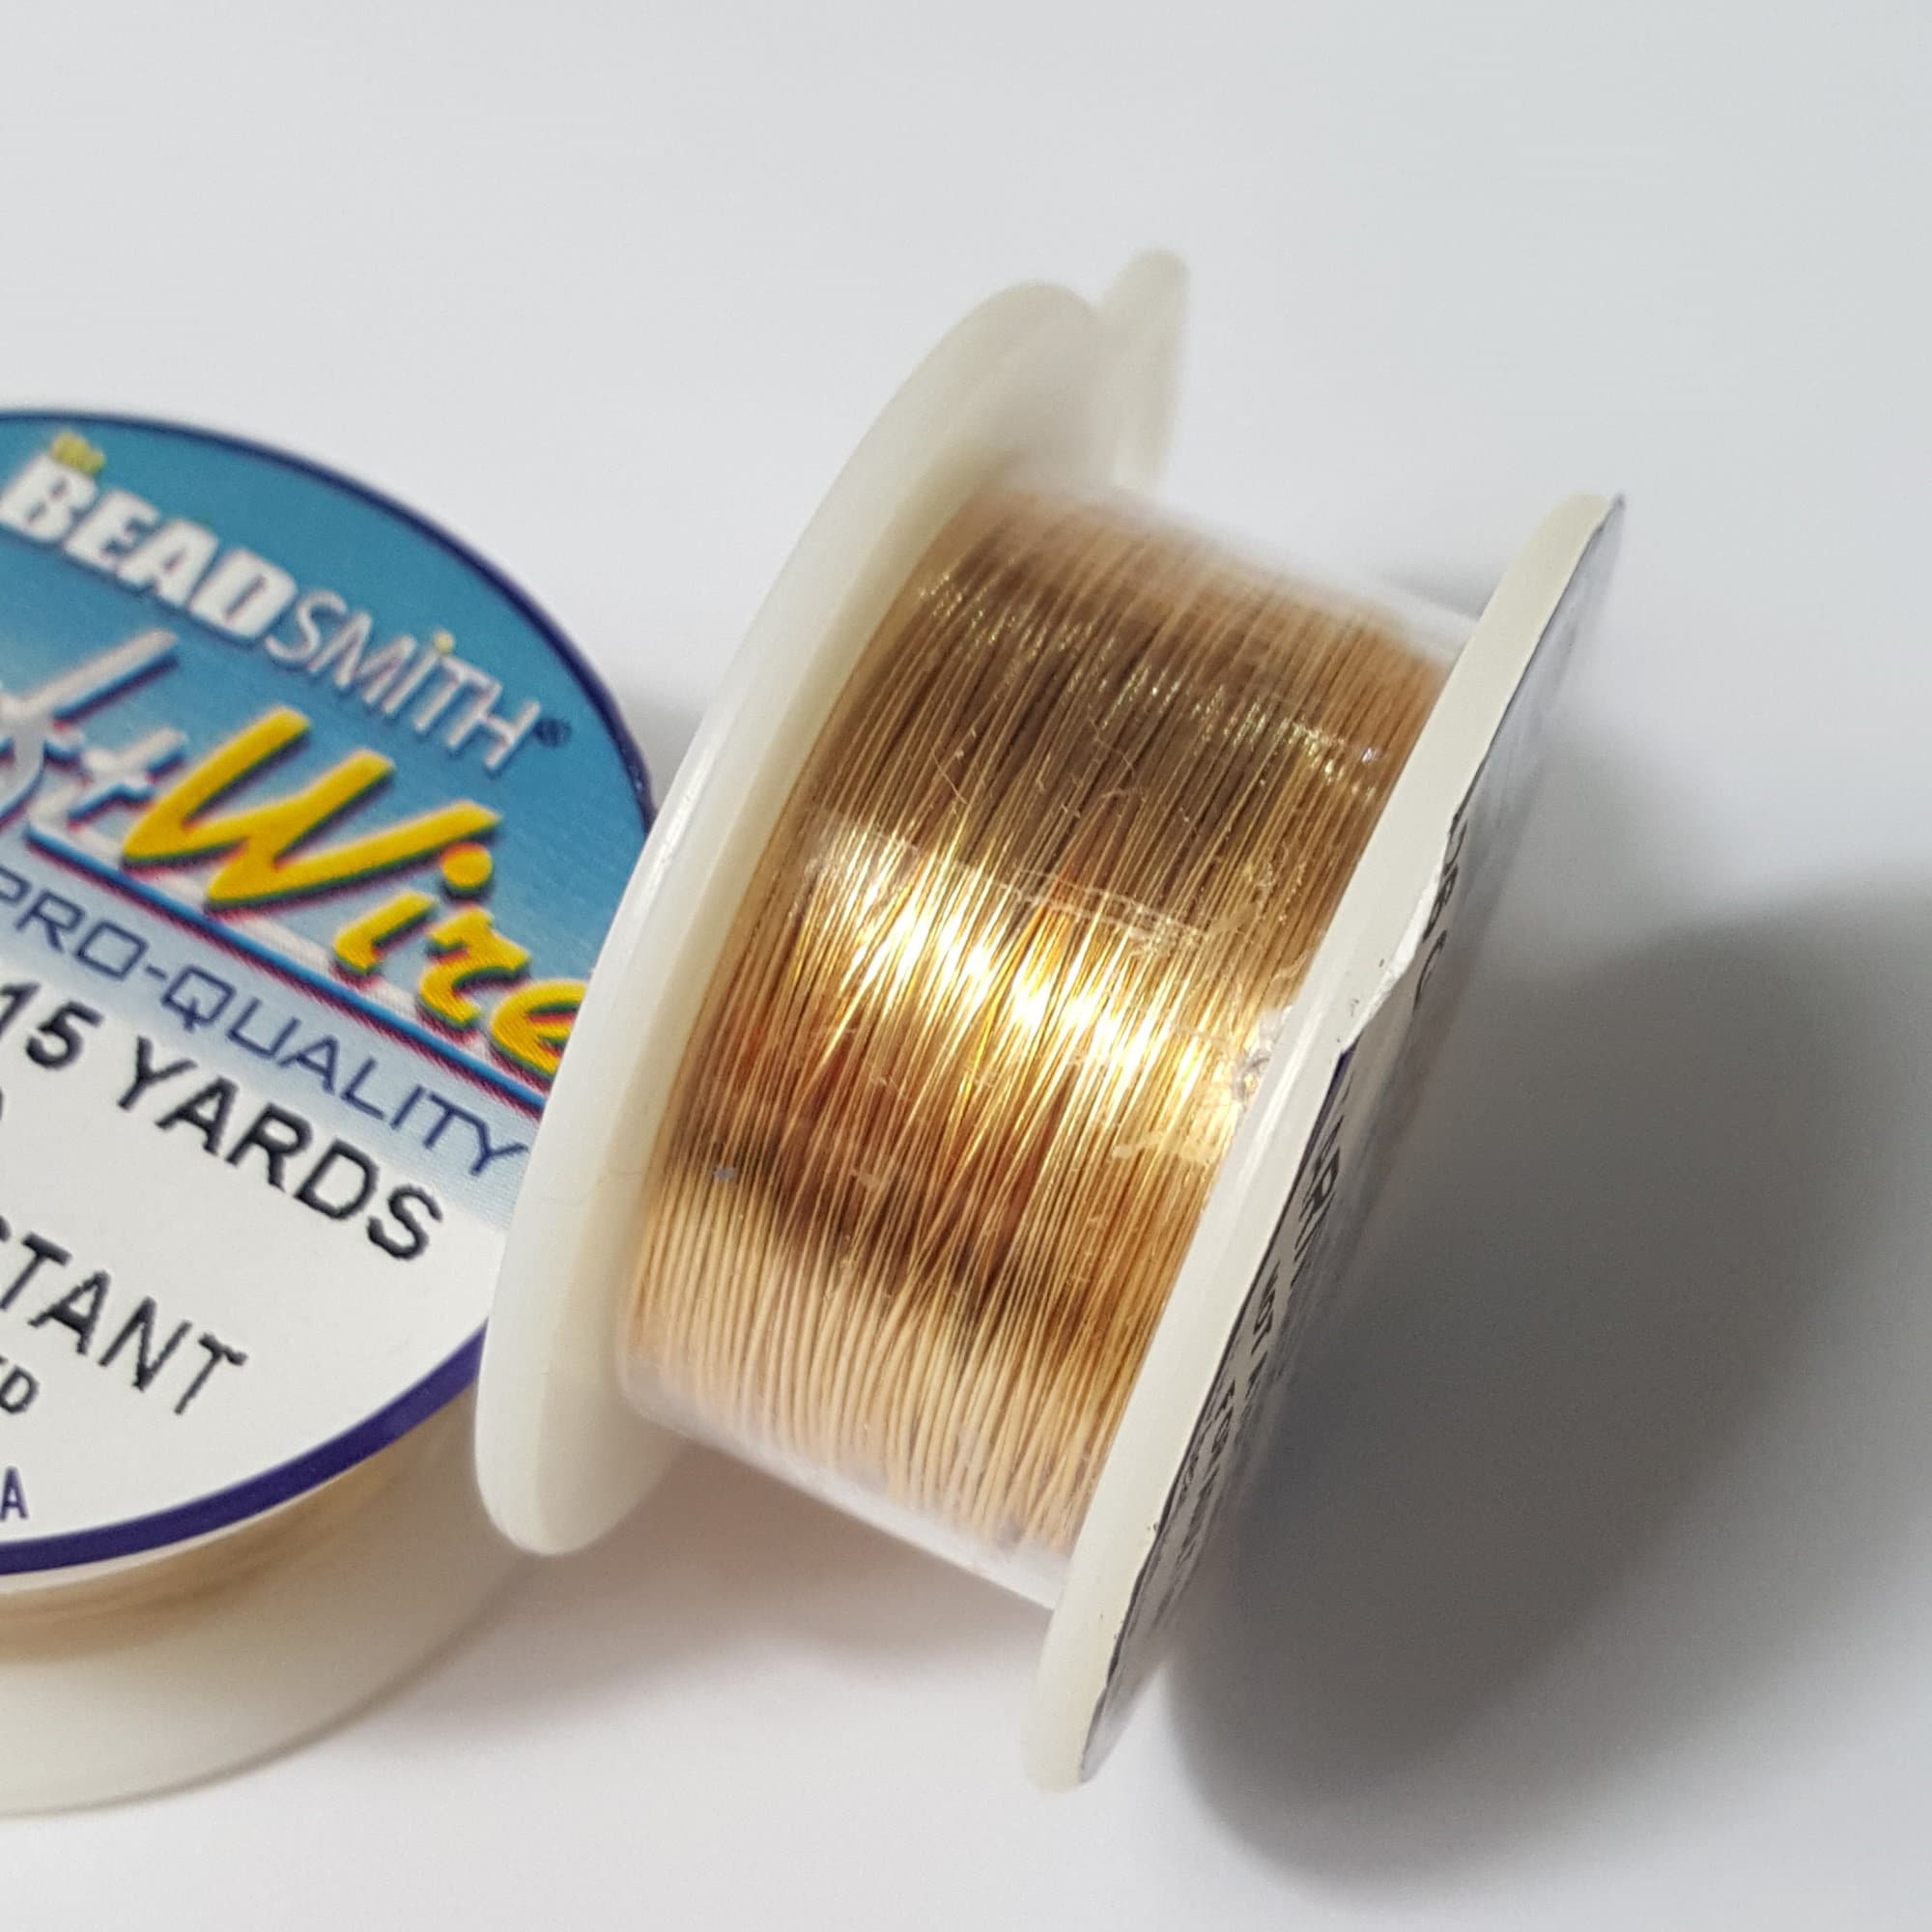 Craft Wire 26 Gauge GOLD PLATED 15 Yards by BeadSmith